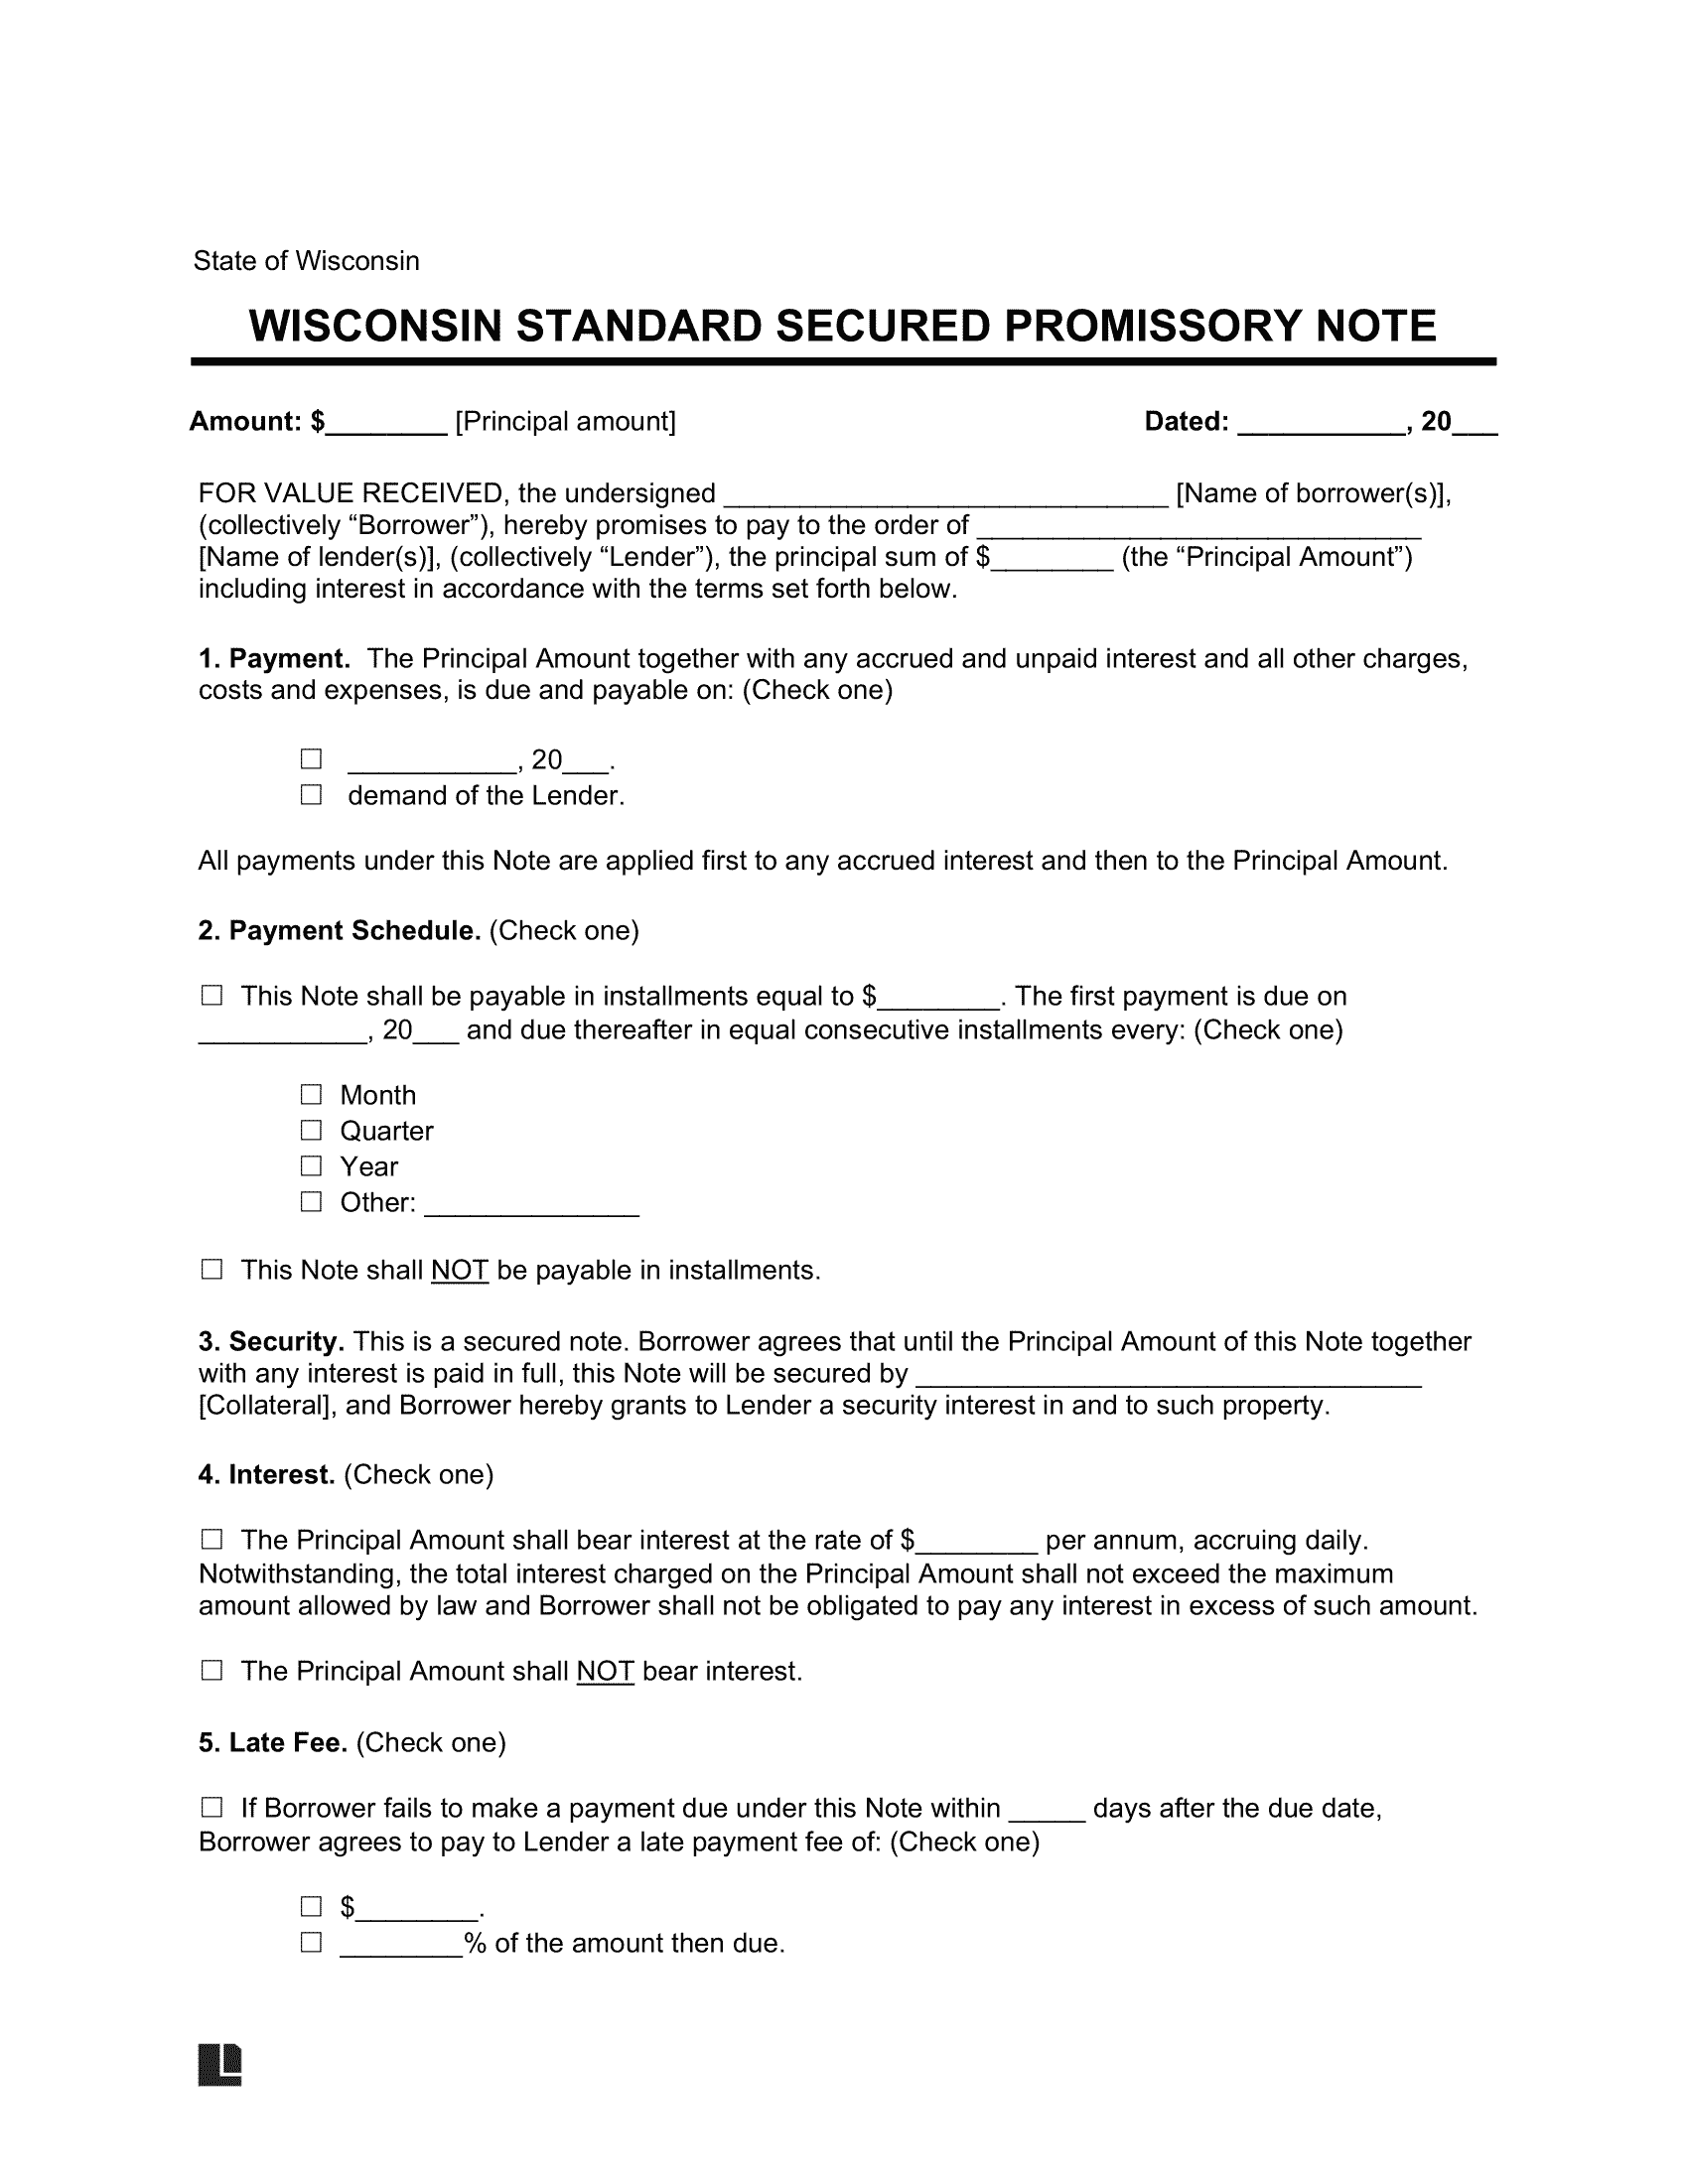 Wisconsin Standard Secured Promissory Note Template